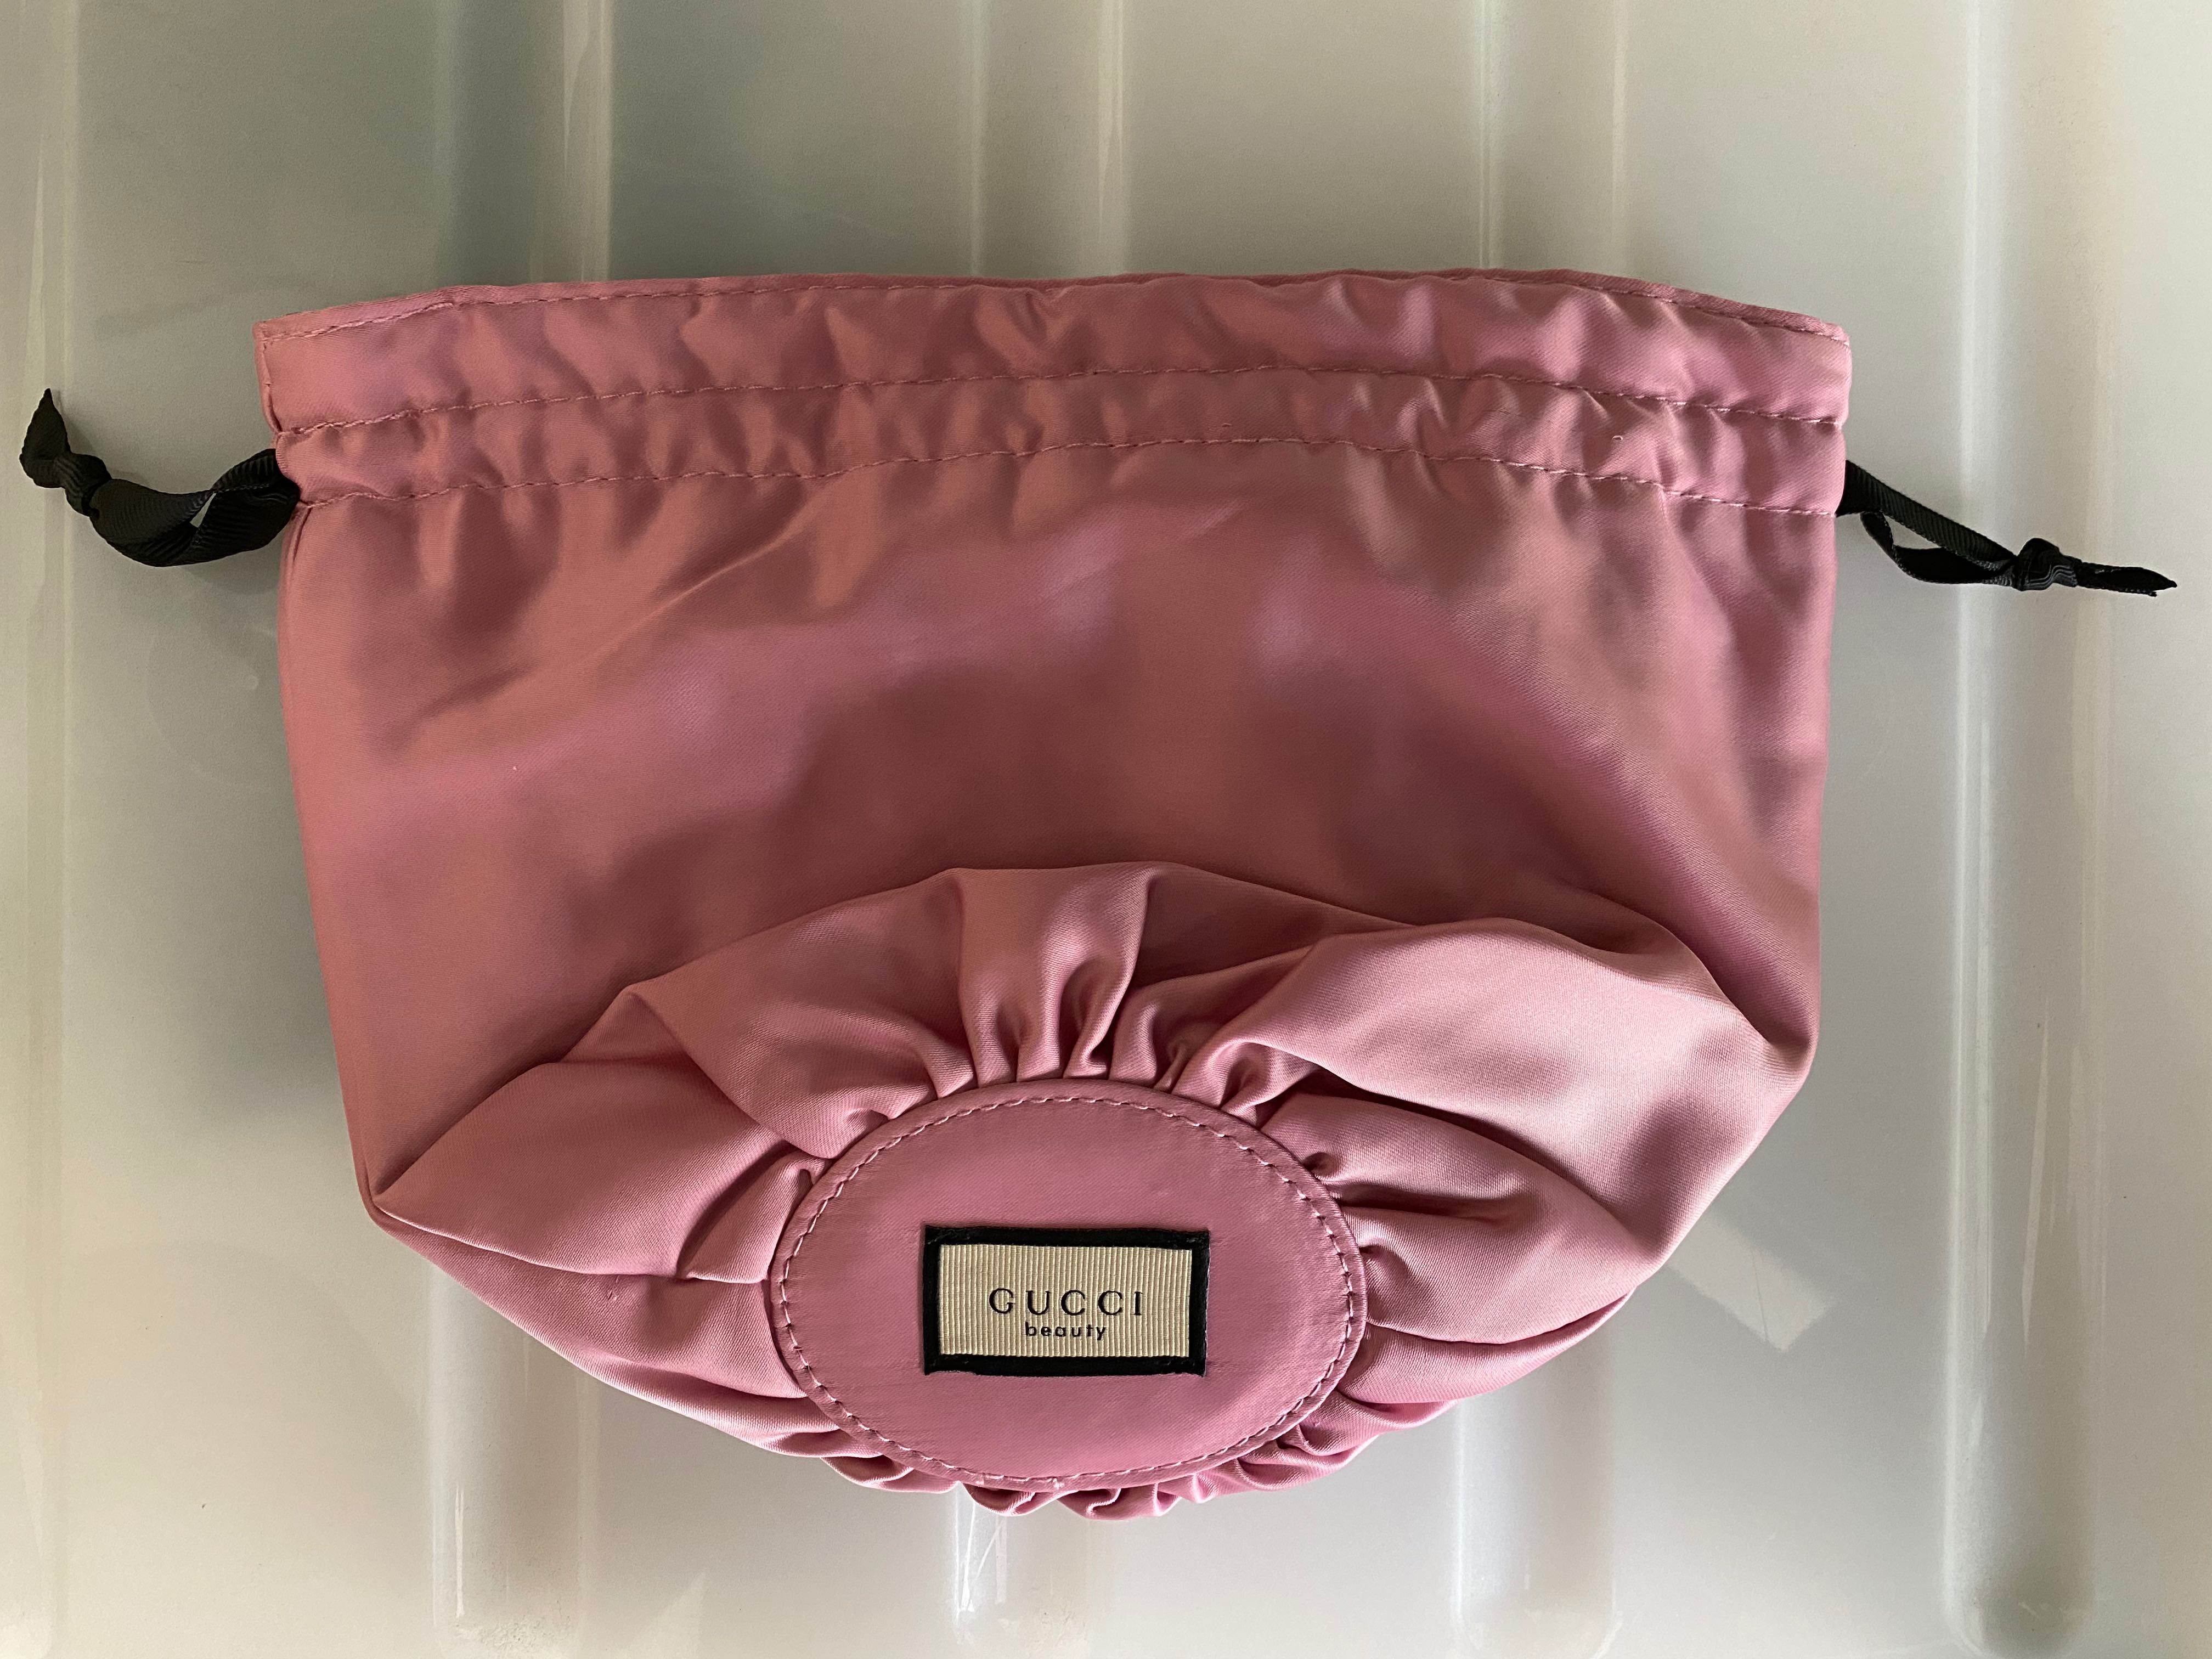 GUCCI Beauty Pink Satin Cosmetic Makeup Bag Pouch VIP Gift New